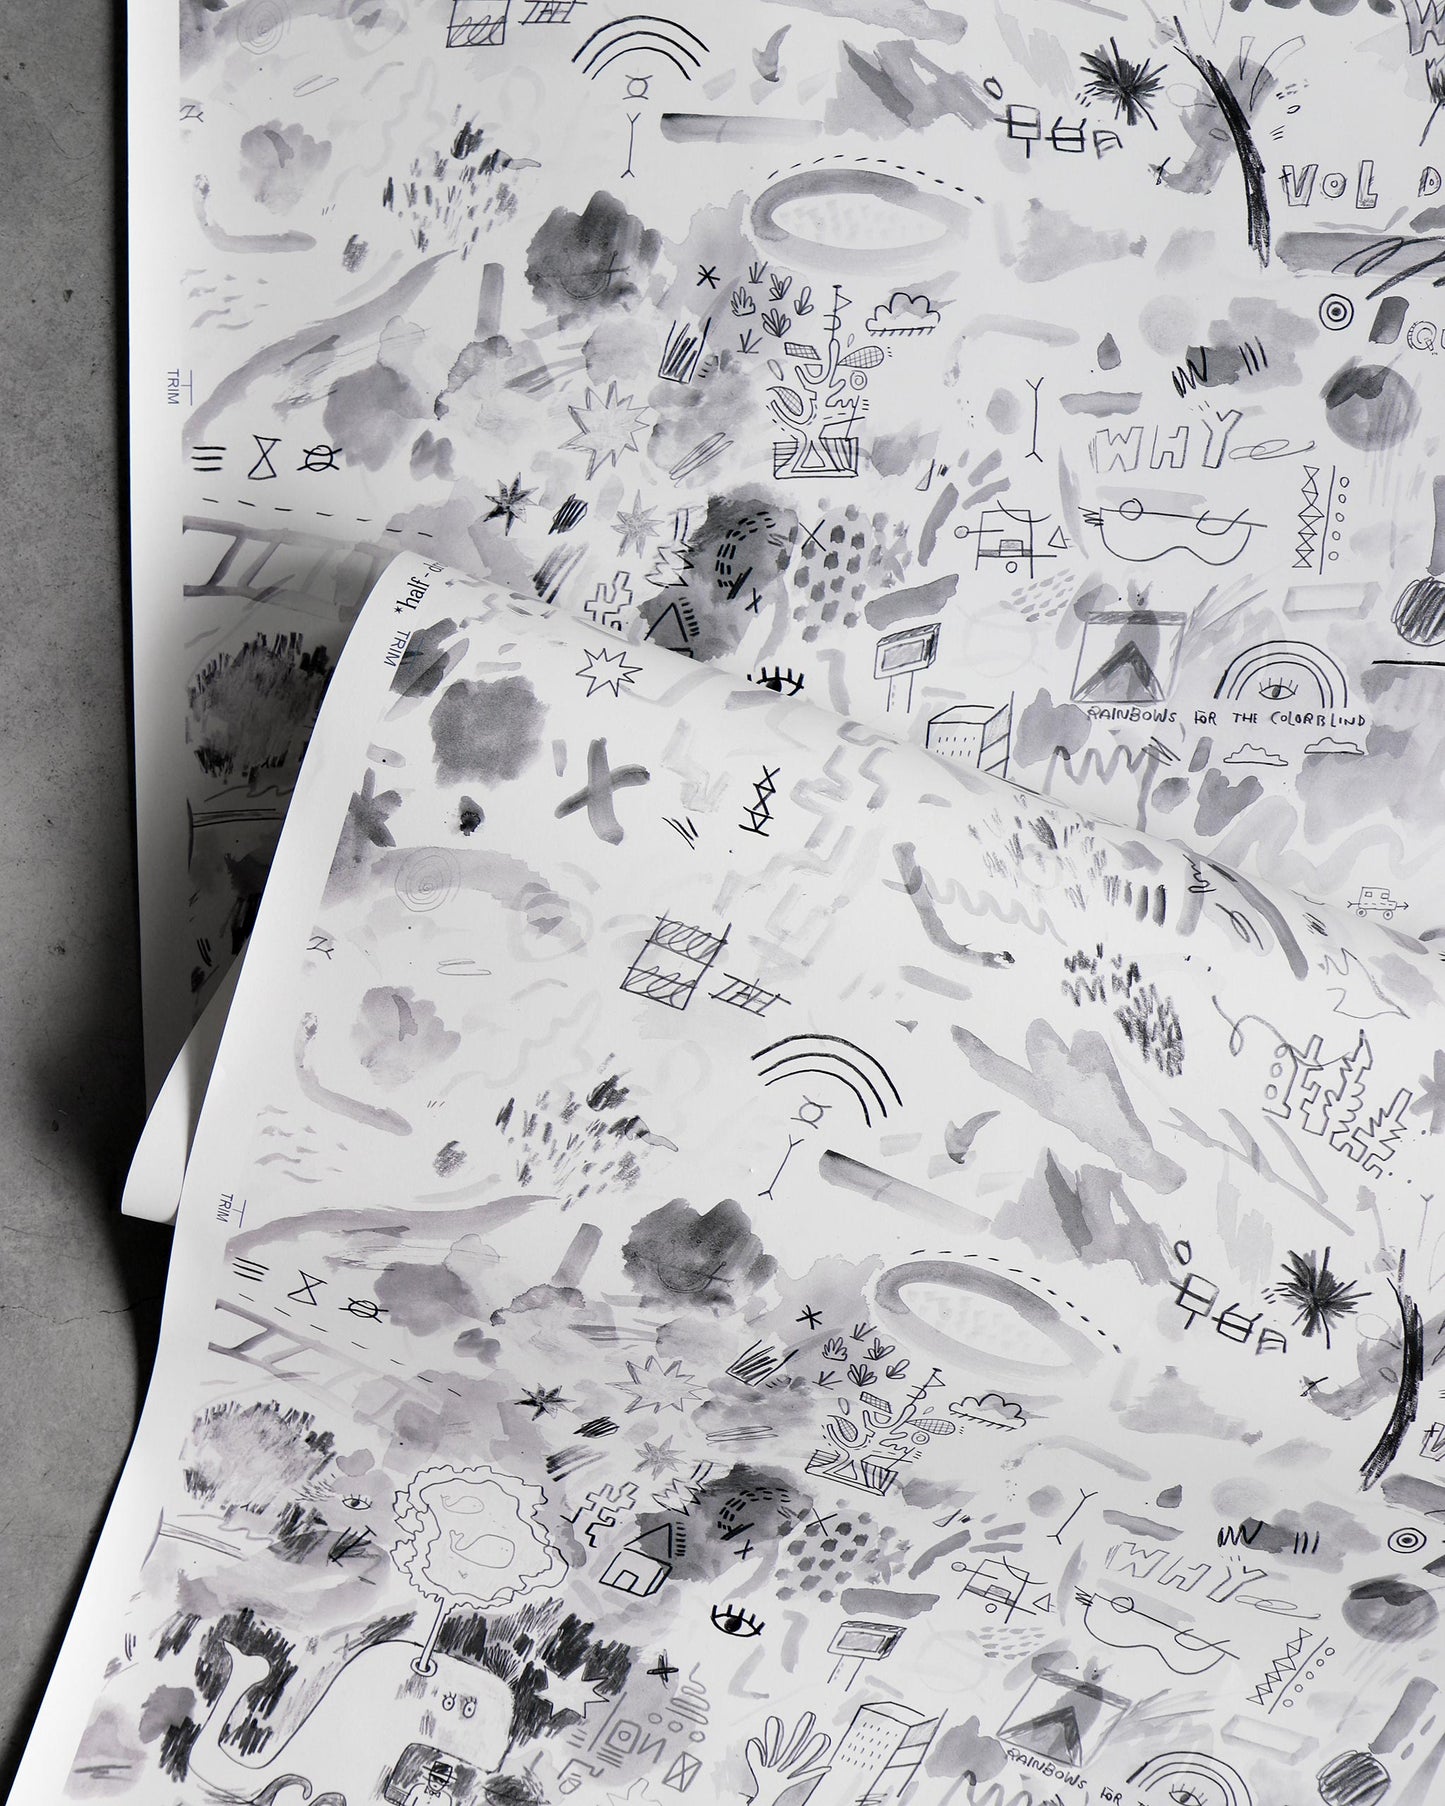 A piece of luxury fabric with Vol de Nuit Wallpaper||Noire drawings on it.